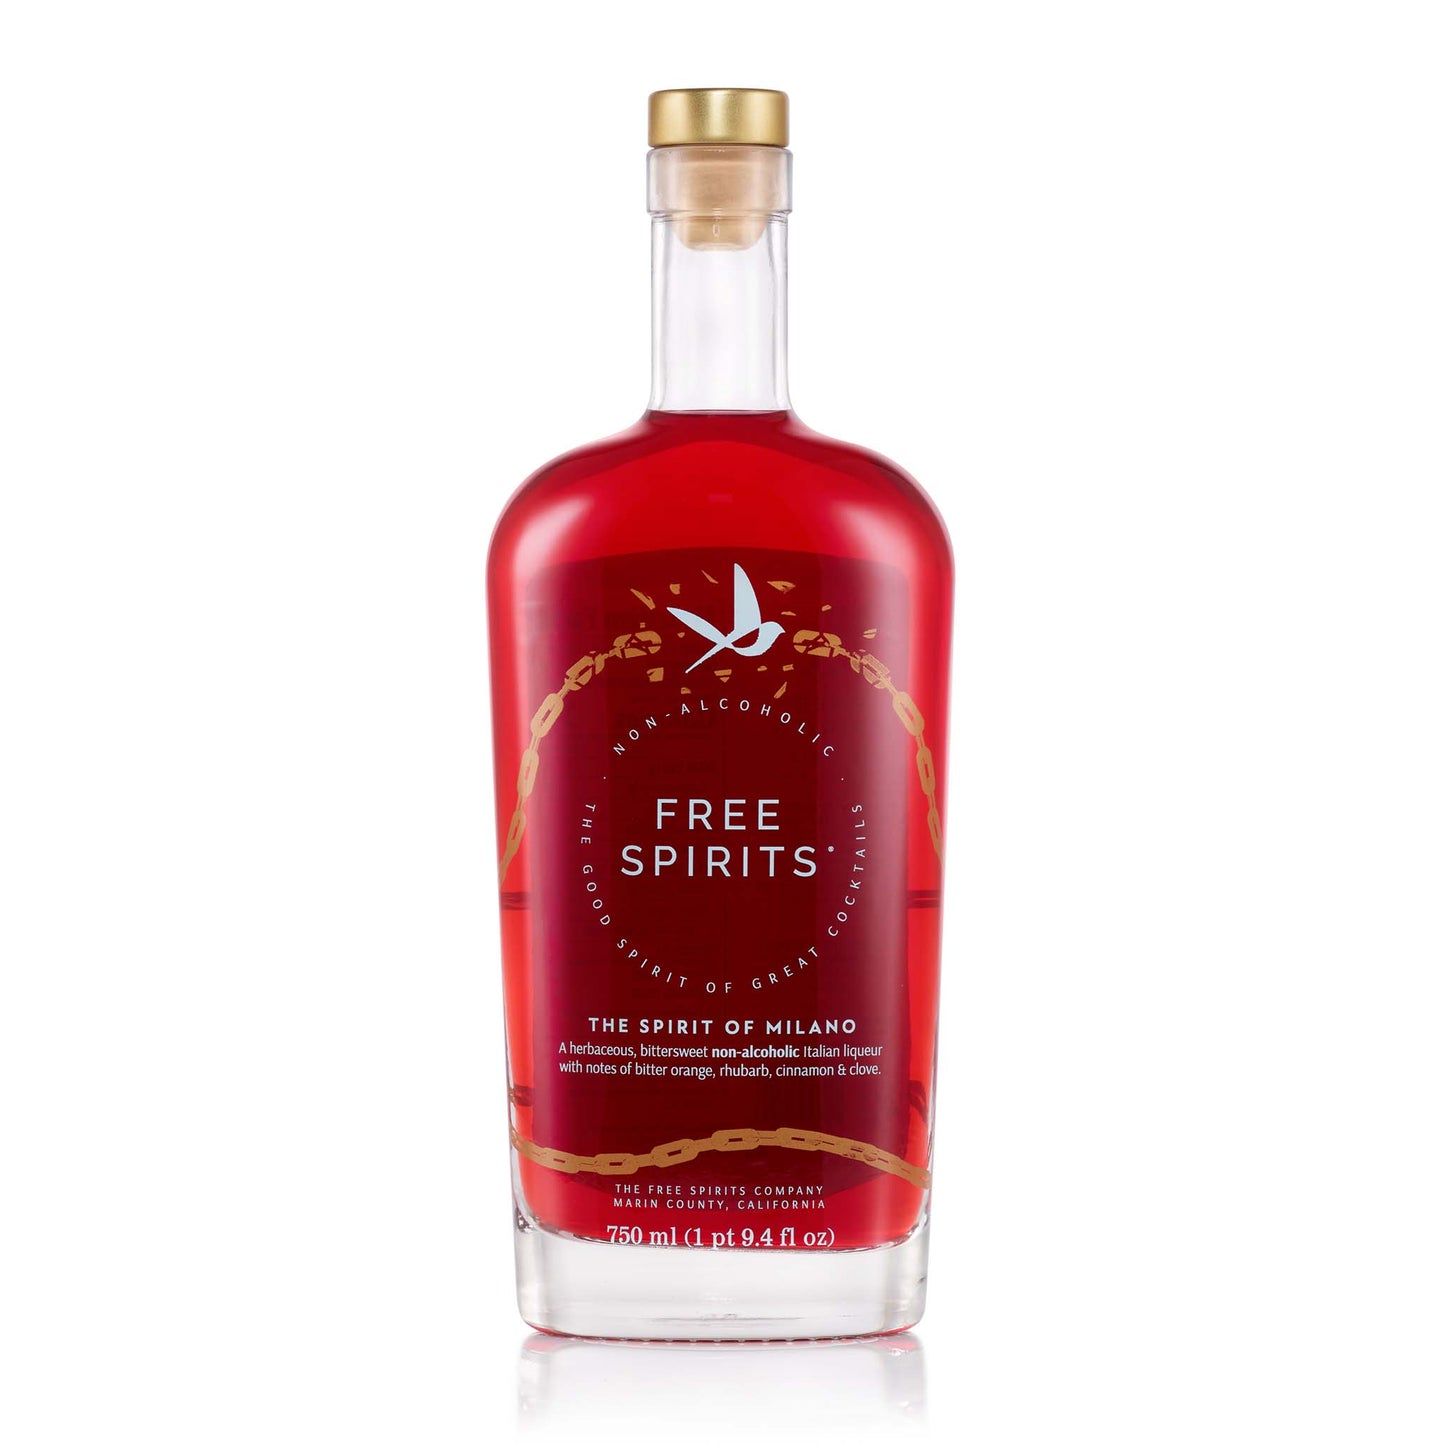 The Winter Spirit Bundle by The Free Spirits Company